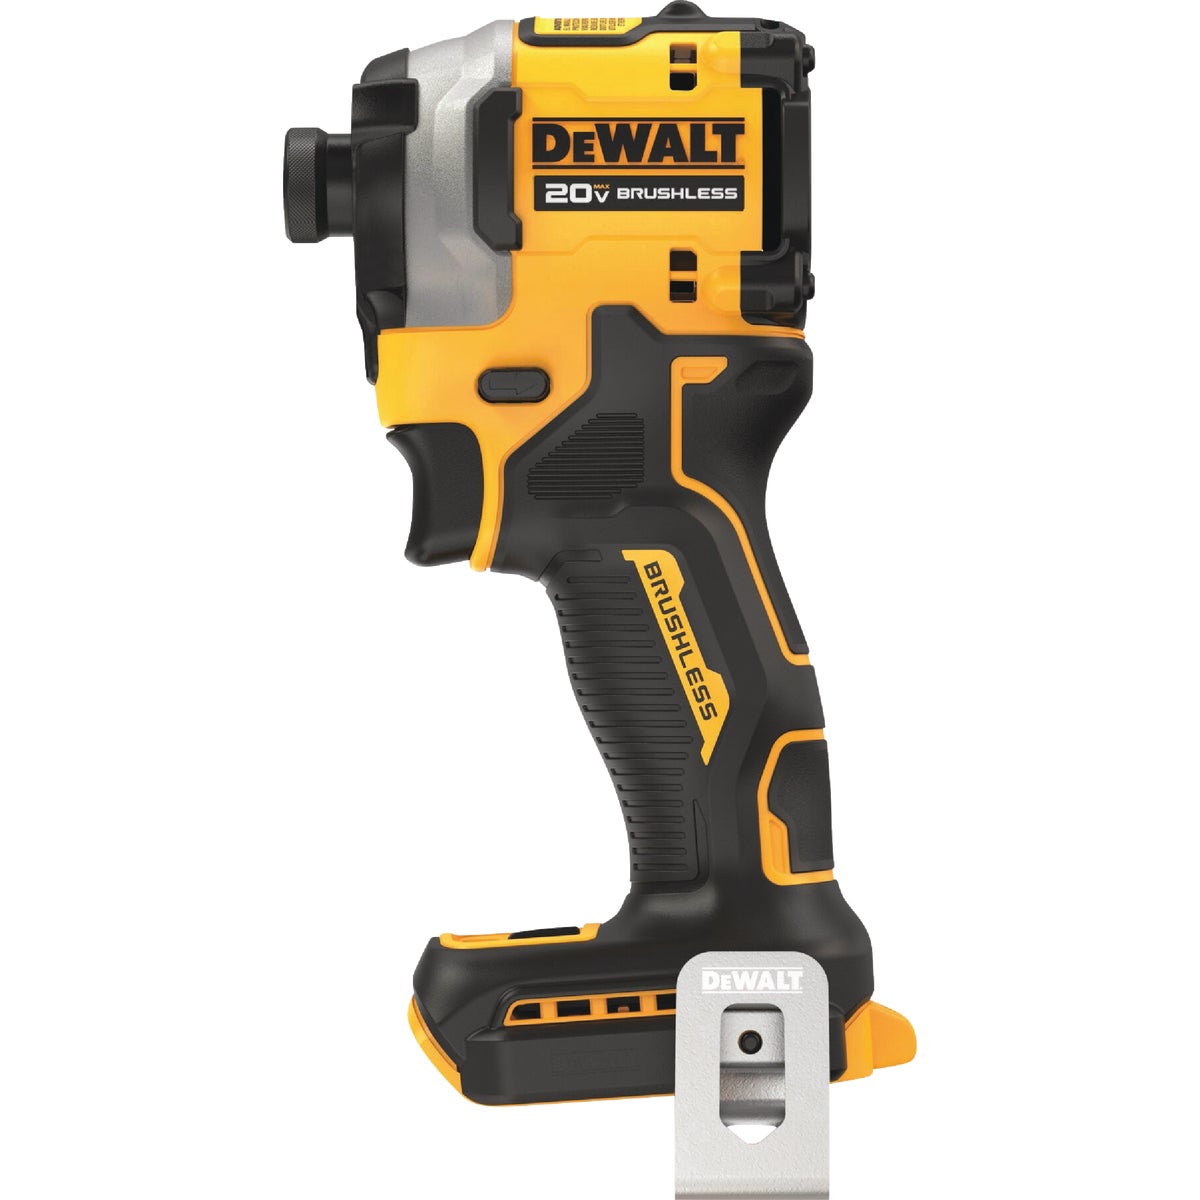 DEWALT ATOMIC 20-Volt MAX Lithium-Ion Brushless 1/4 In. Cordless Impact Driver (Tool Only)